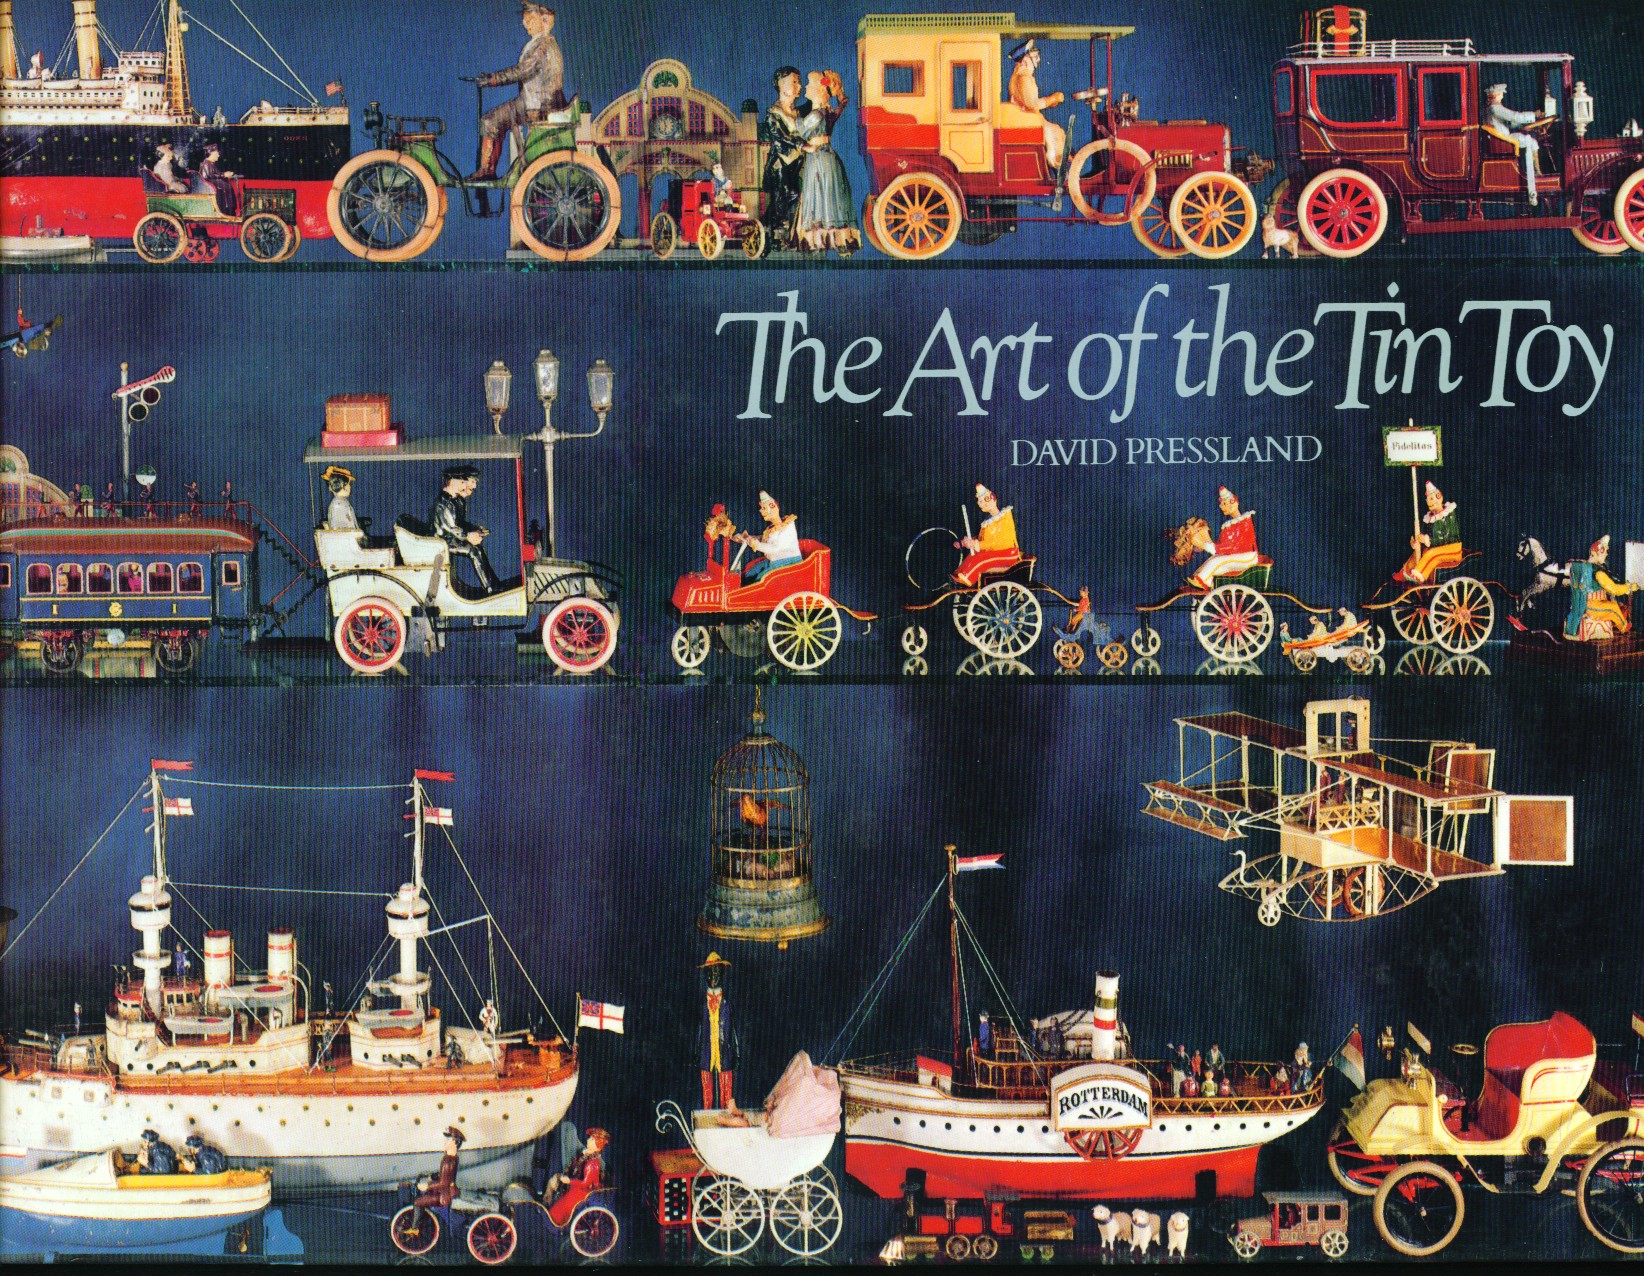 The art of the tin toy